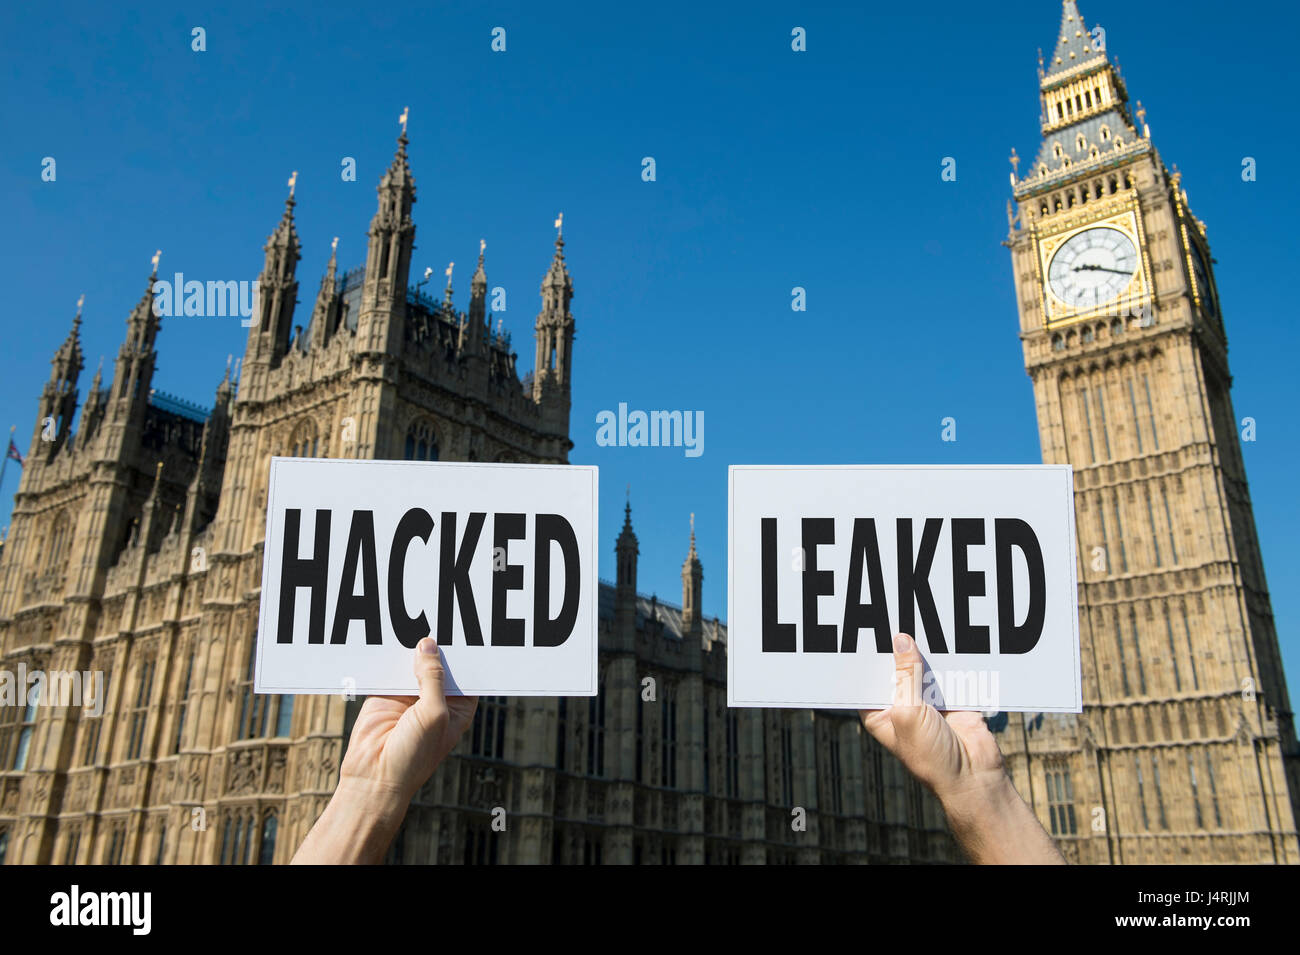 Signs representing issues with modern elections, the hacking of accounts and leaking of information, at the Houses of Parliament at Westminster London Stock Photo